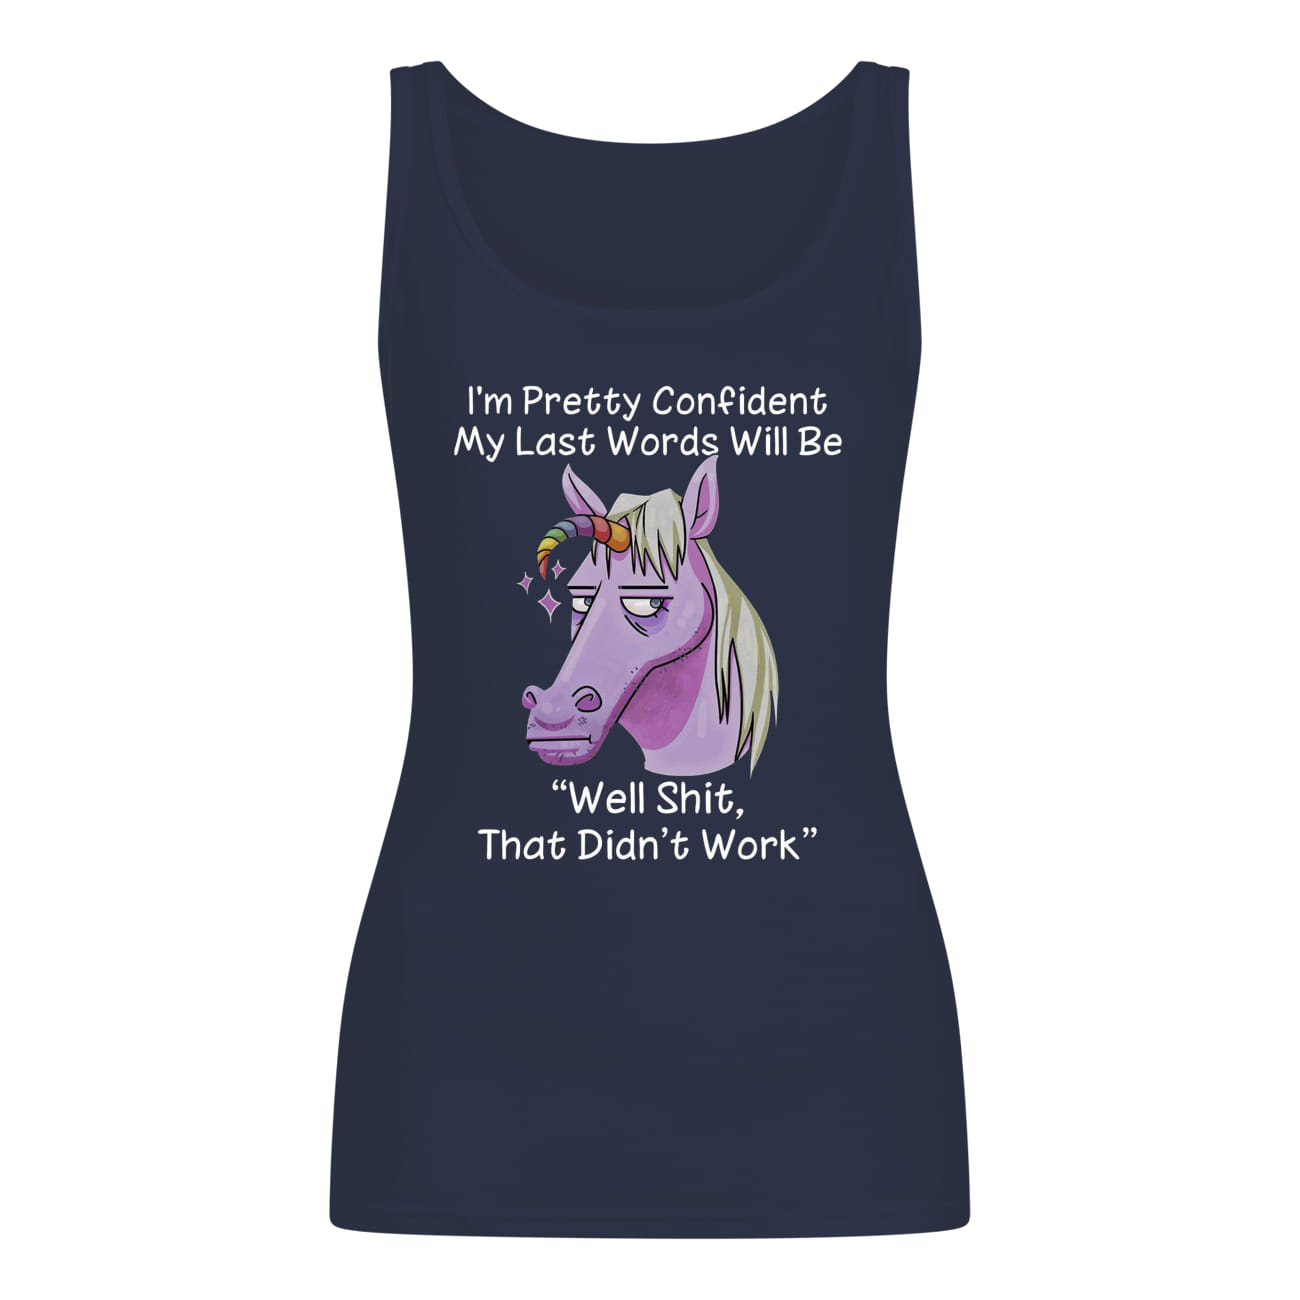 I'm pretty confident my last words will be well shit that didn't work unicorn tank top